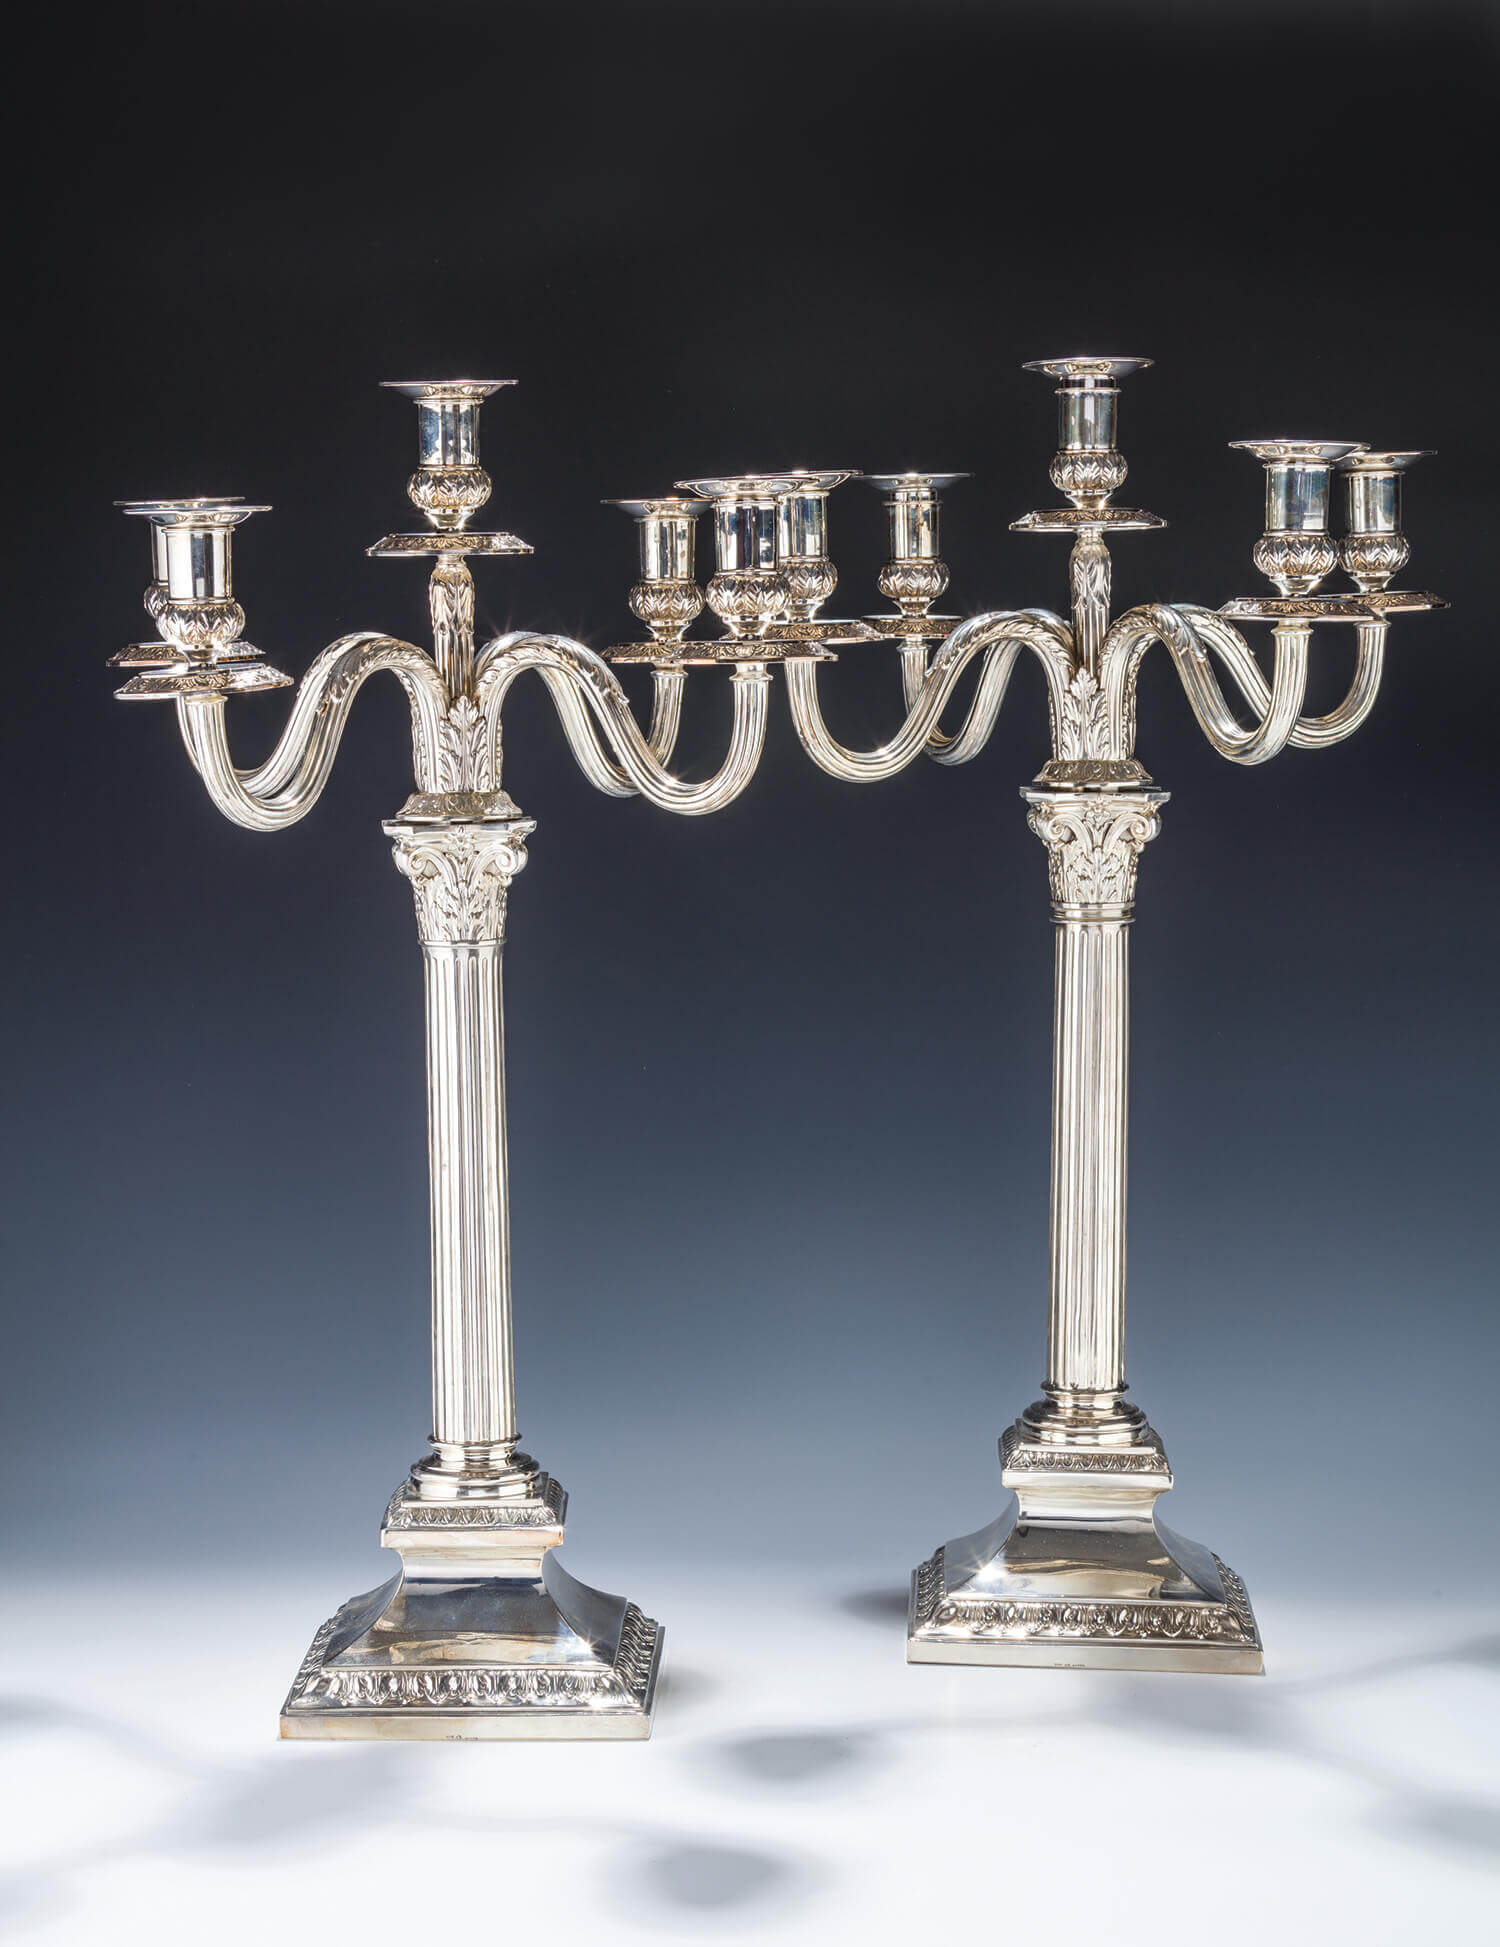 092. A MONUMENTAL PAIR OF SILVER FIVE LIGHT CANDELABRAS BY LAZARUS POSEN